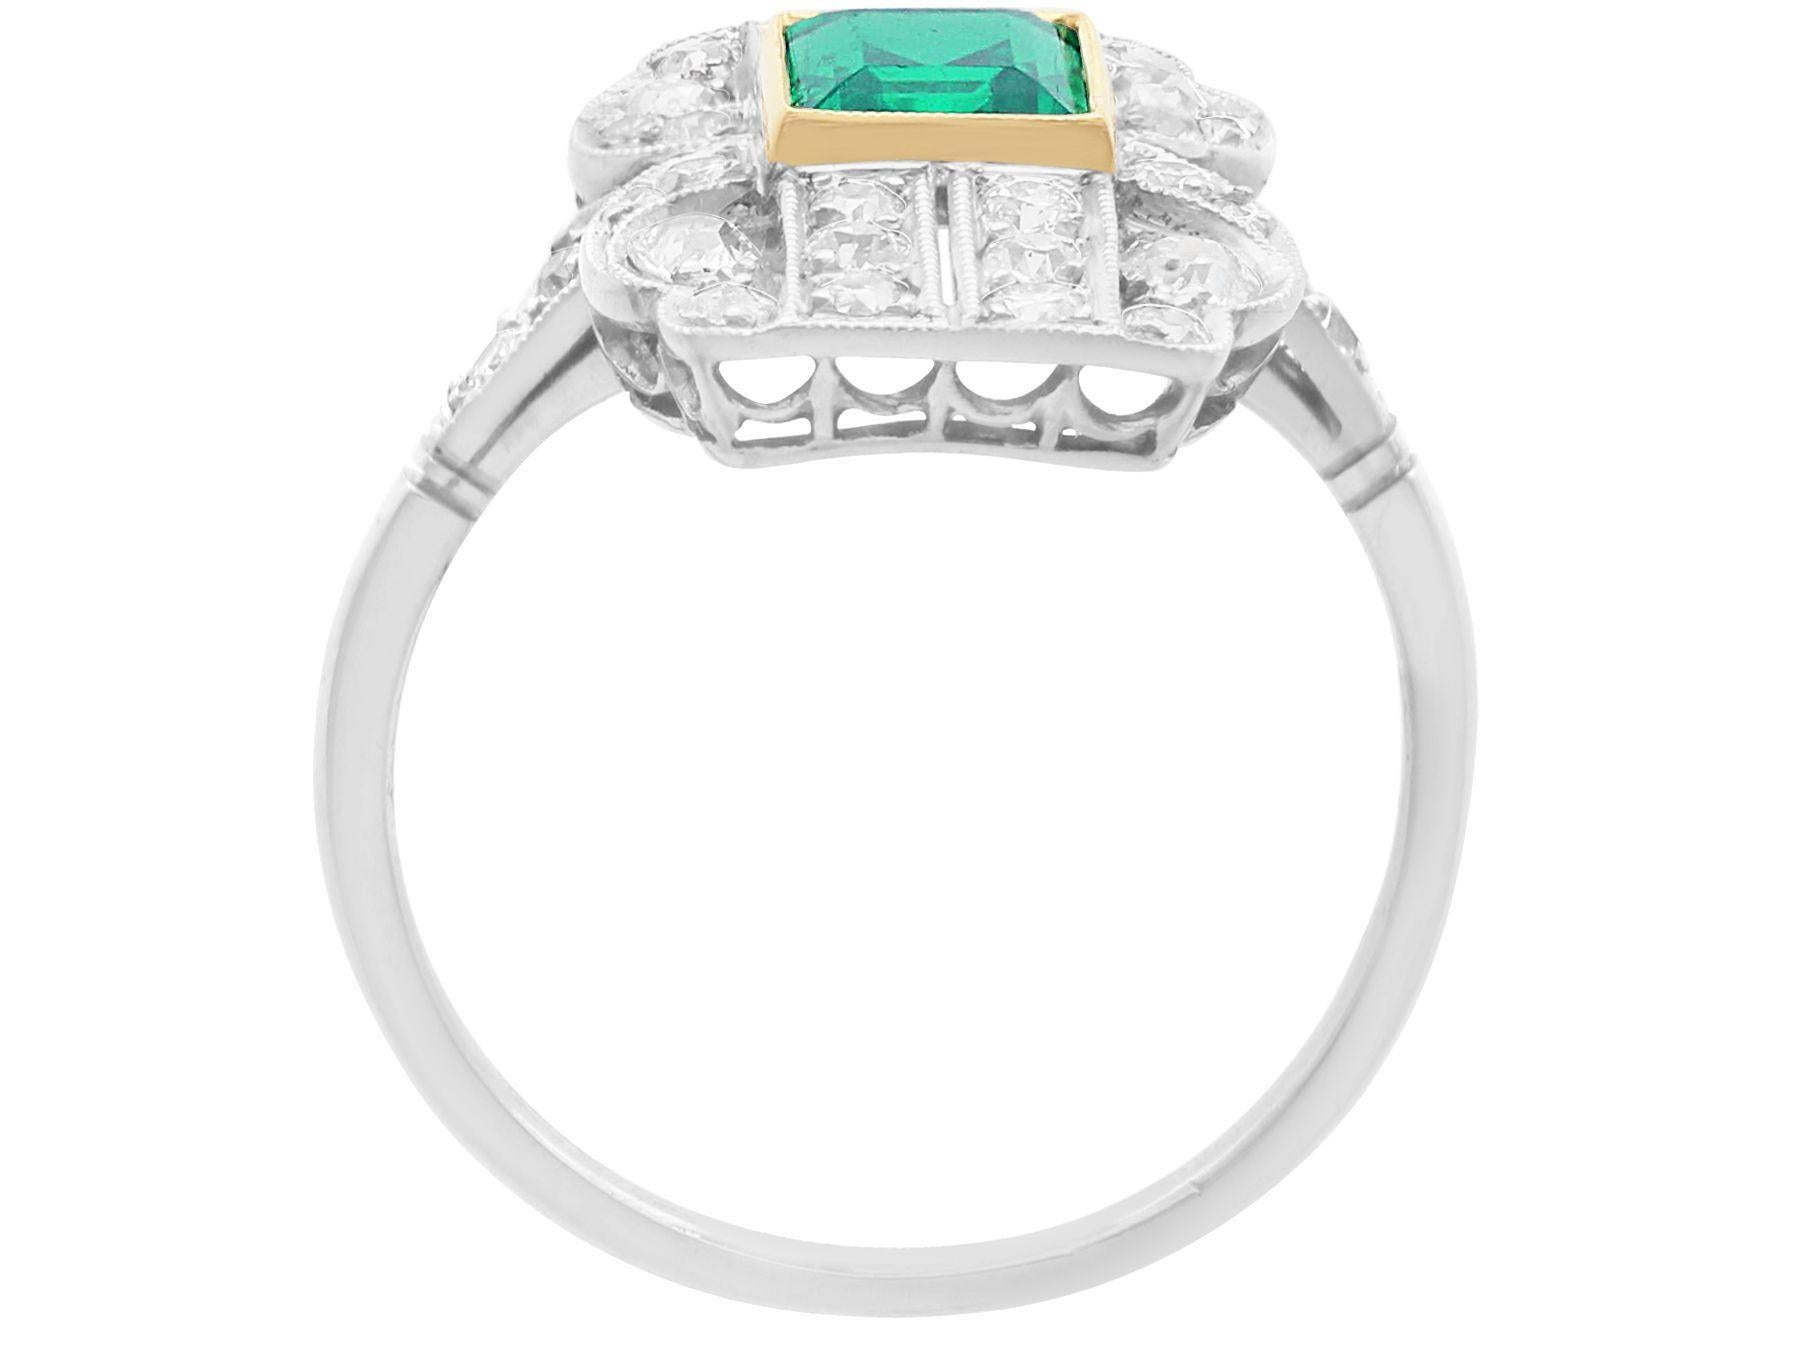 1.13 Carat Emerald and 1.11 Carat Diamond Platinum Cocktail Ring In Excellent Condition For Sale In Jesmond, Newcastle Upon Tyne